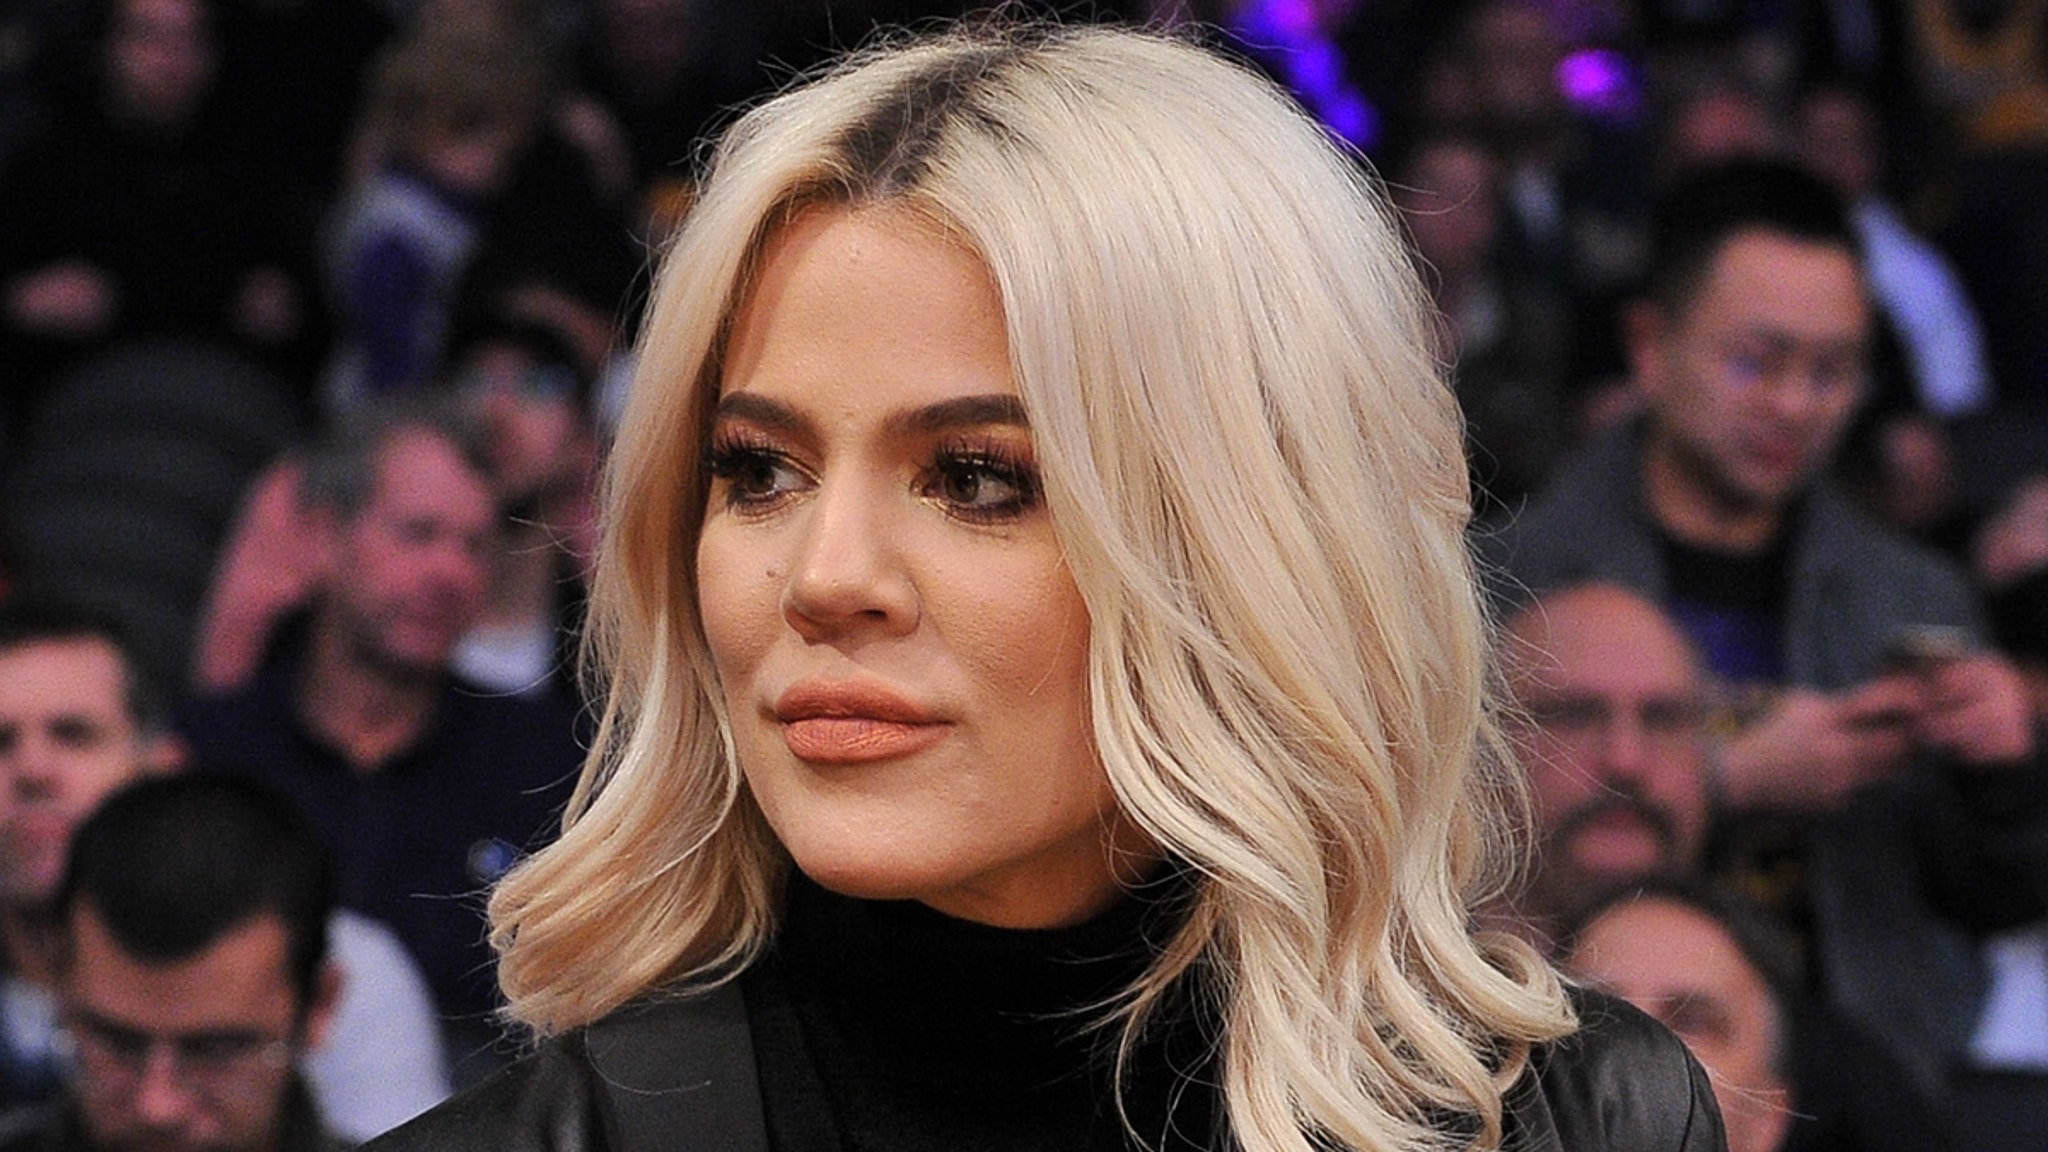 Khloe Kardashian Sued by Former Household Assistant For Unpaid Wages